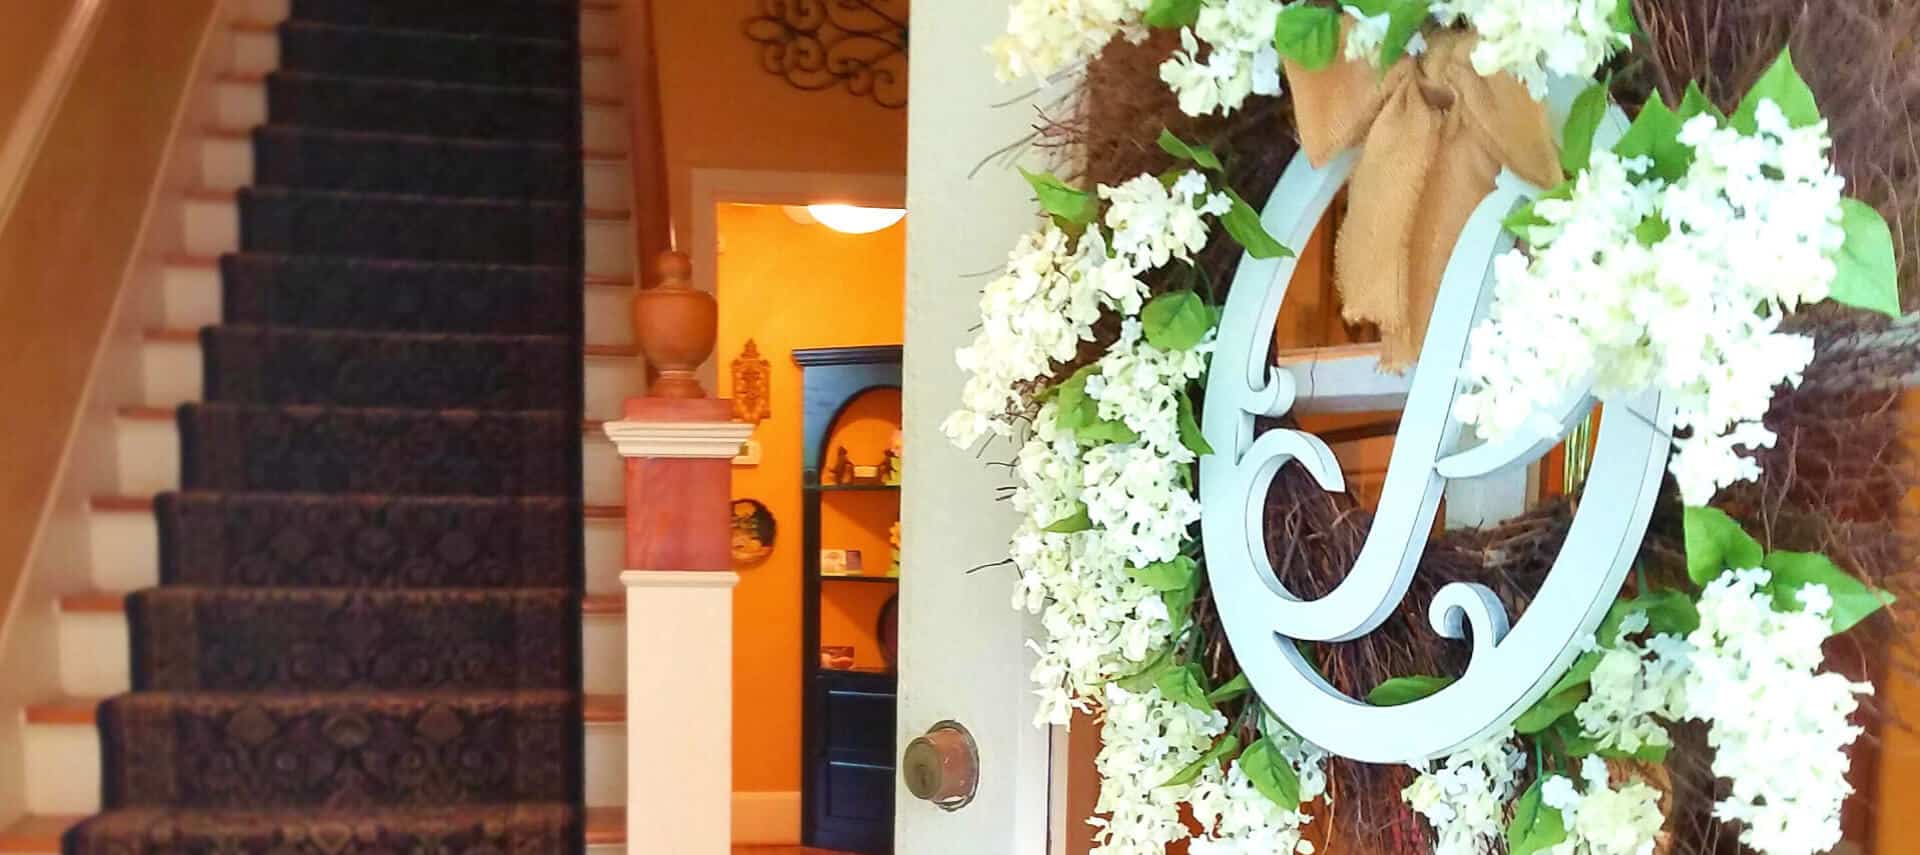 Entryway looking at staircase, with a flowered "P" wreath on the front door.